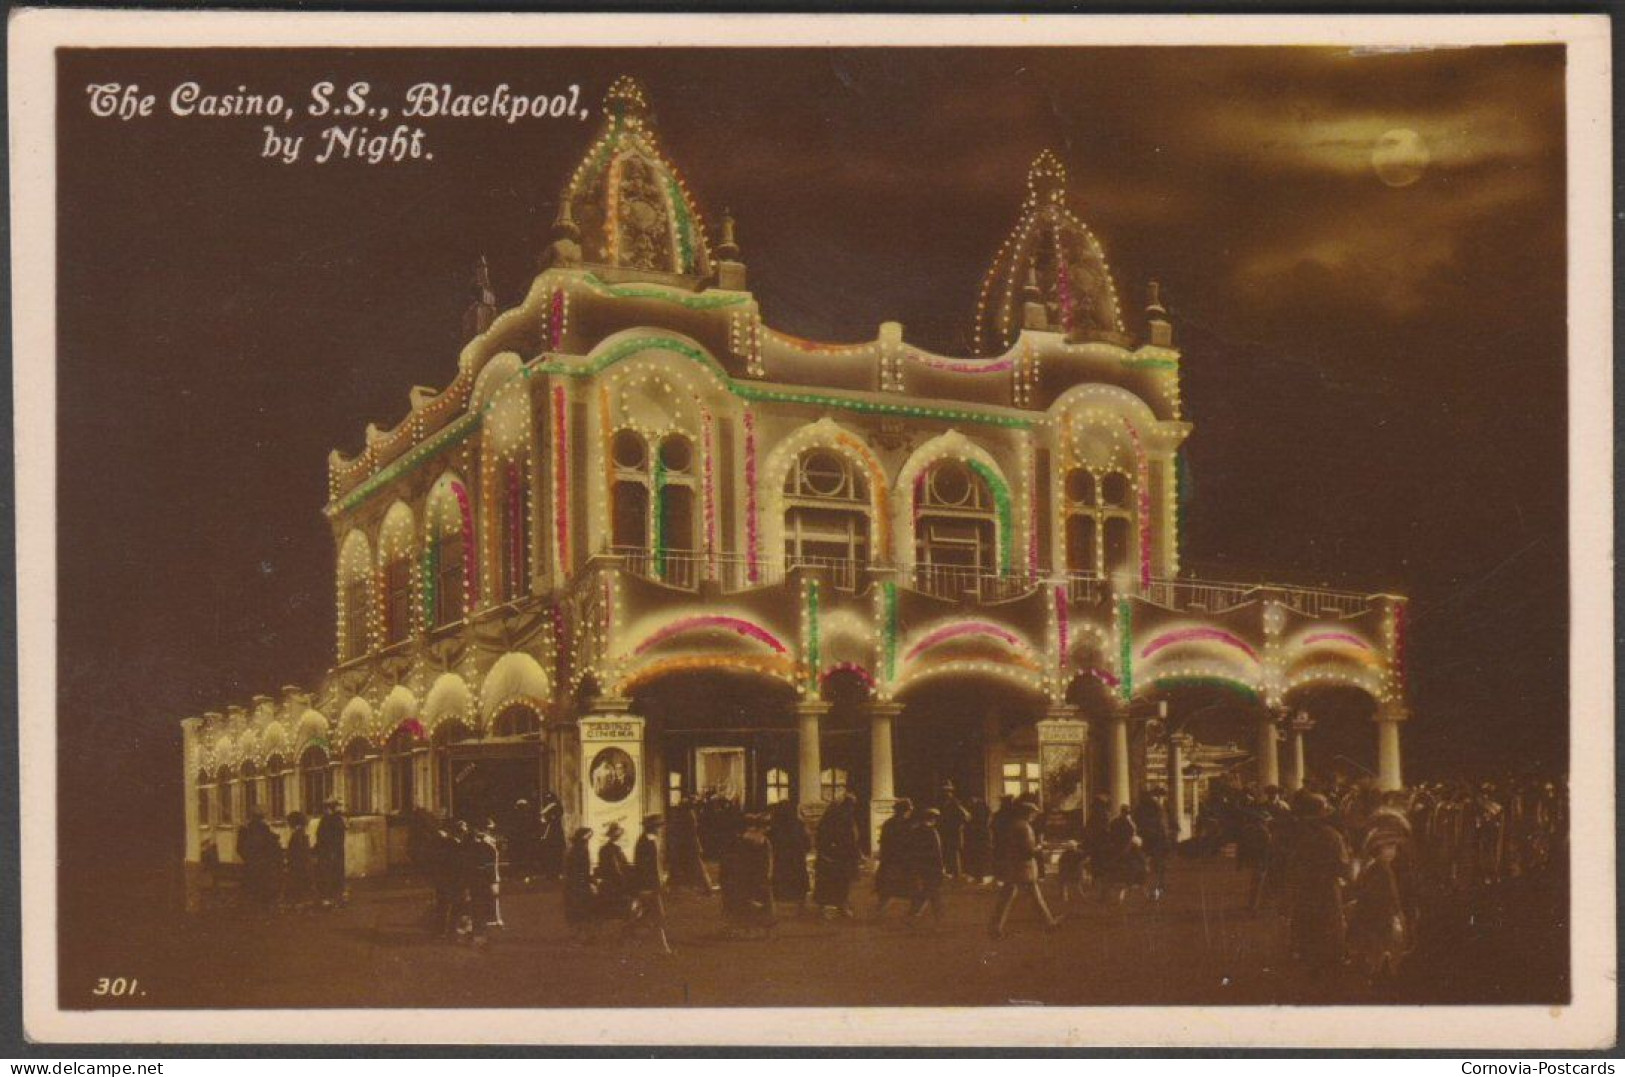 The Casino, By Night, South Shore, Blackpool, C.1920s - Advance Series RP Postcard - Blackpool